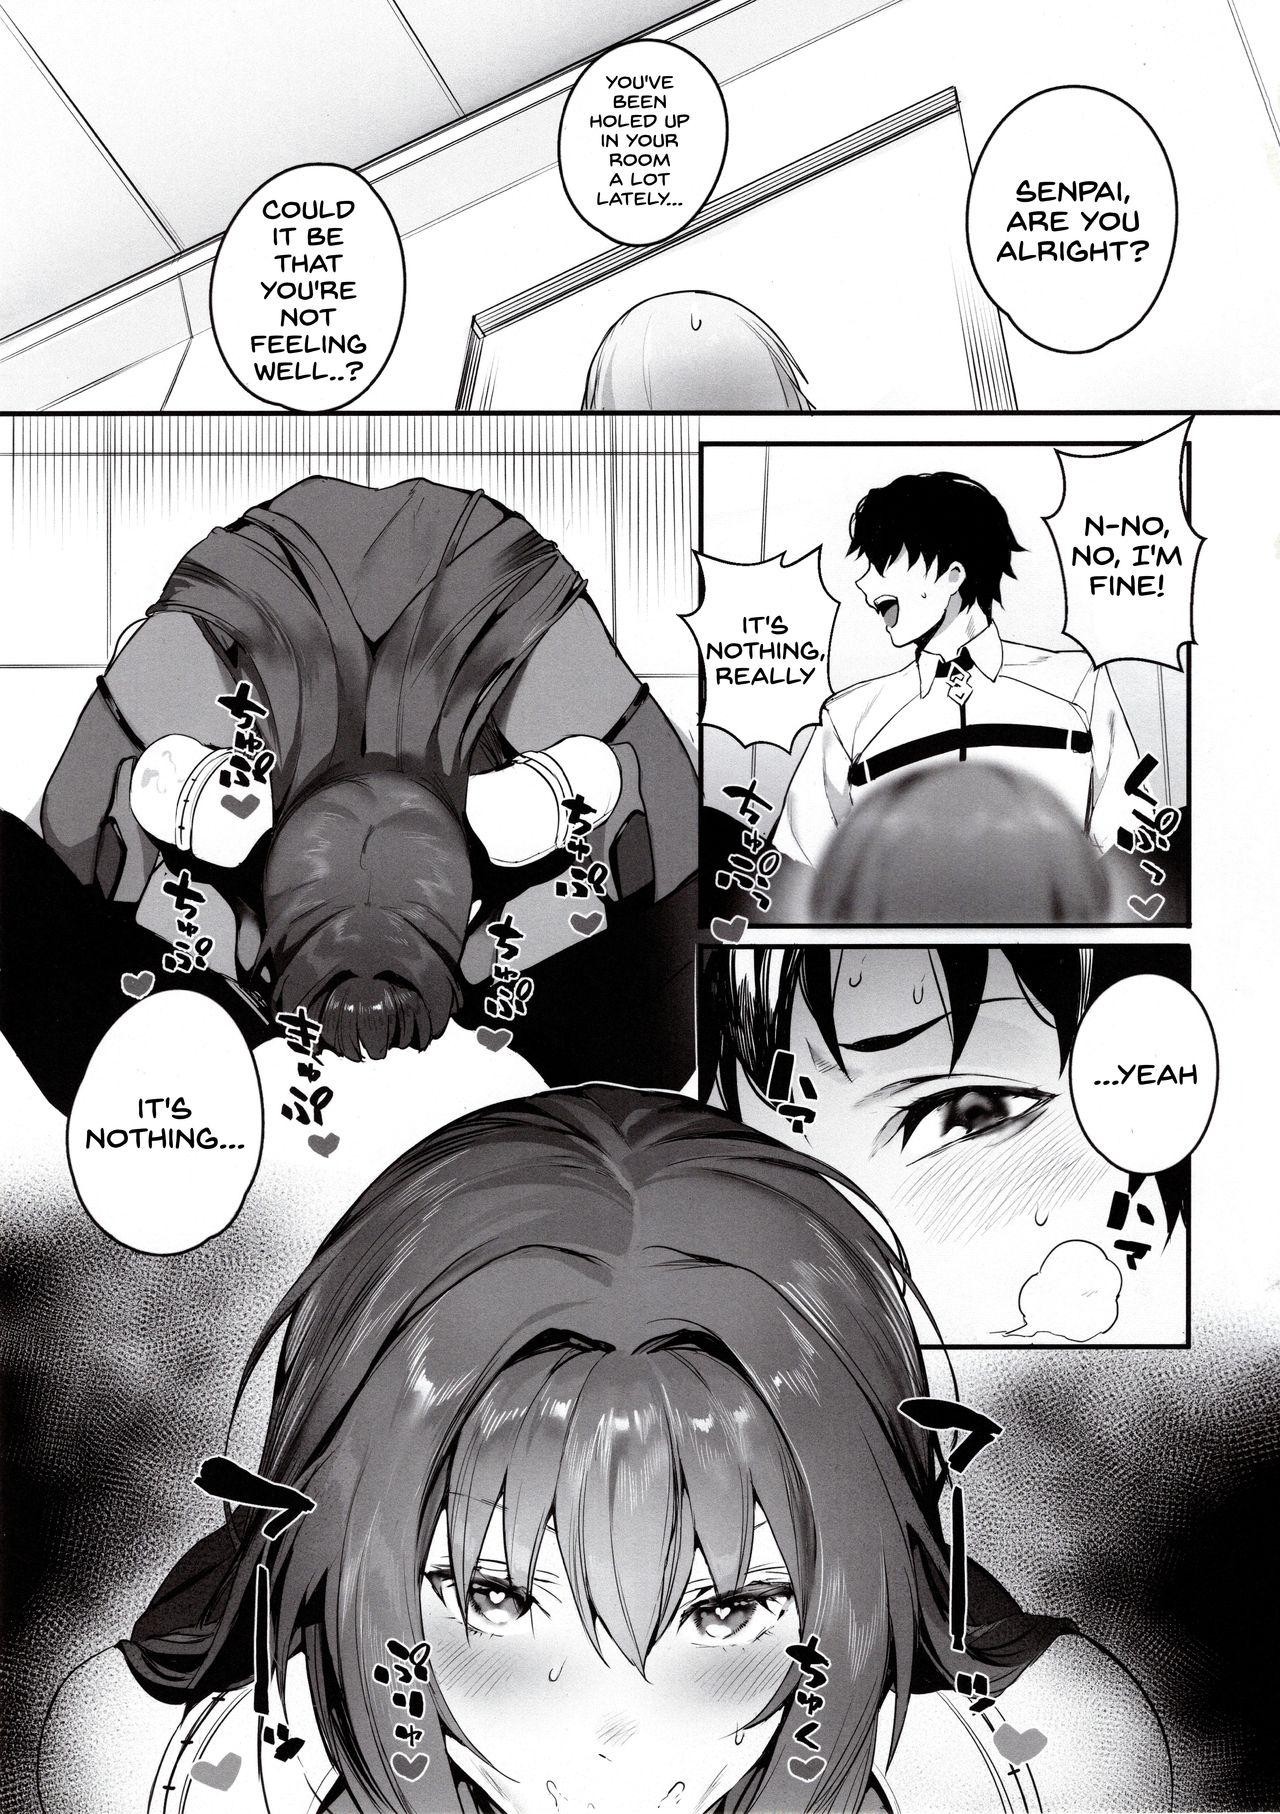 Peludo MOVE ON UP - Fate grand order Dutch - Page 2